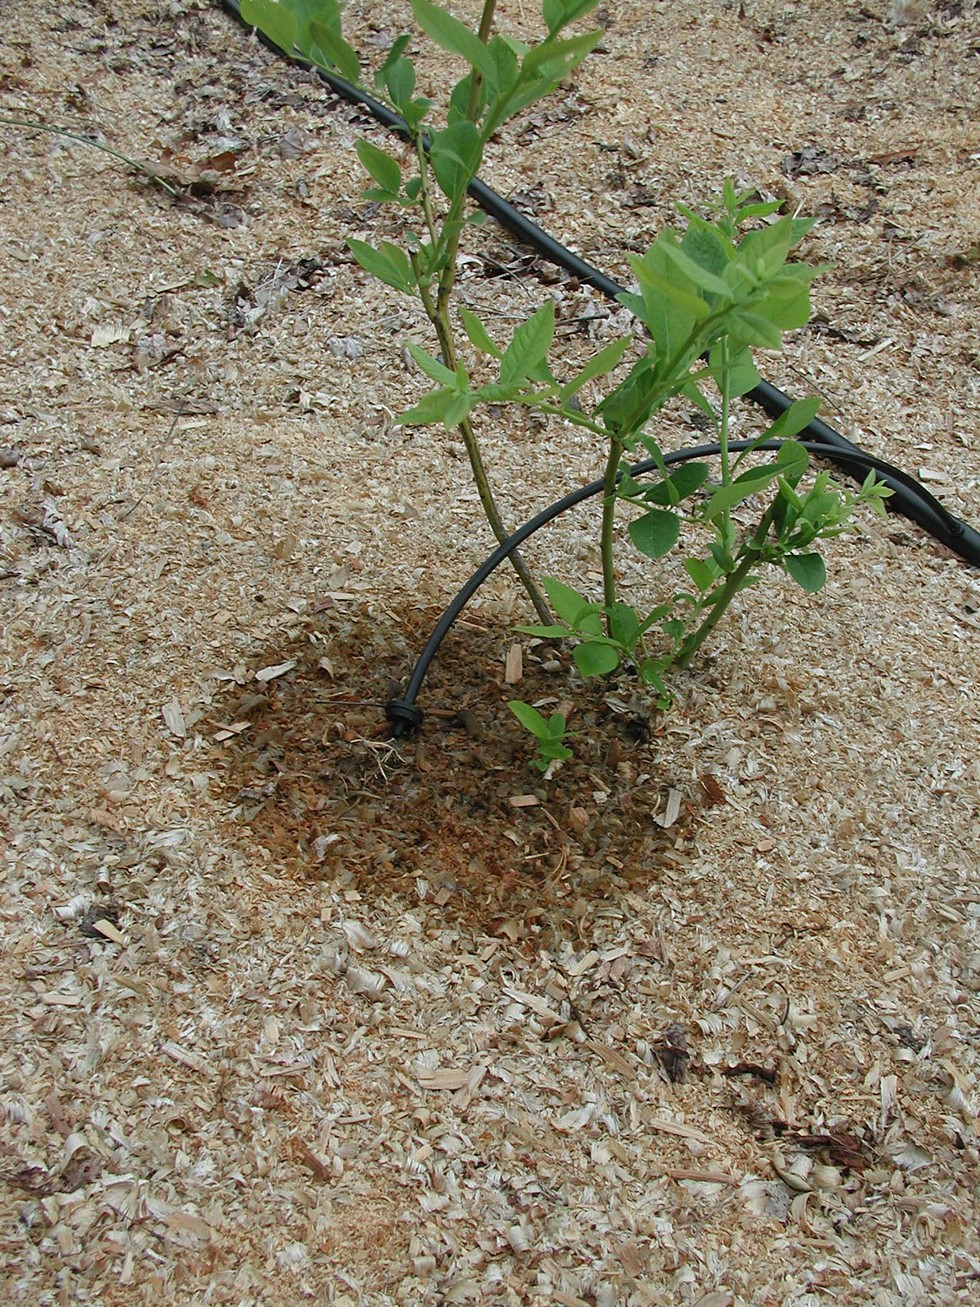 Drip irrigation of a blueberry plant